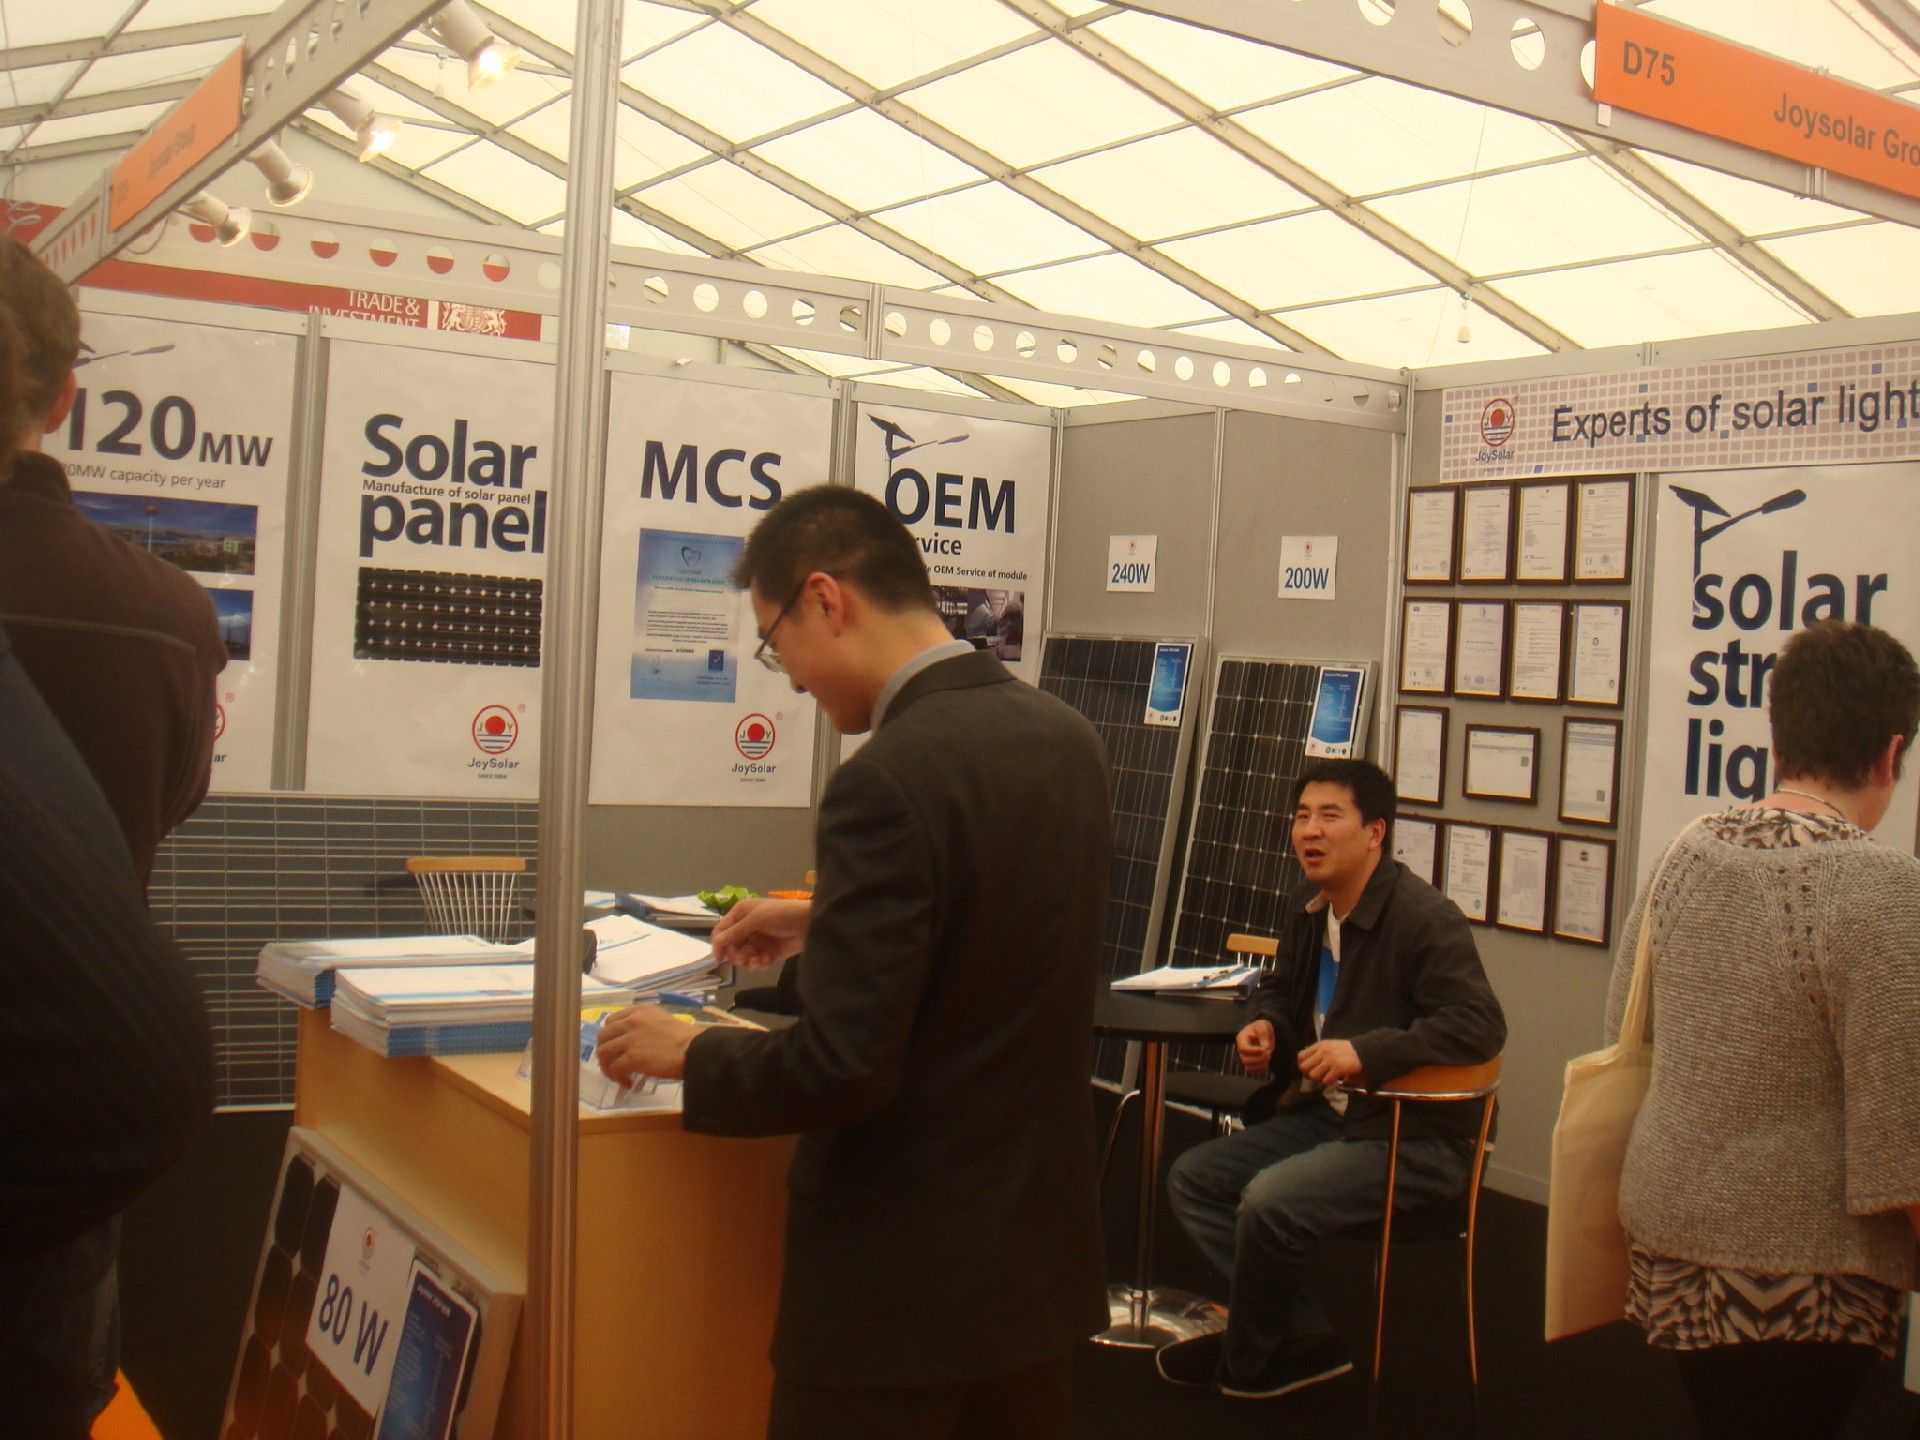 2011 London ECO and BUILD EXPO